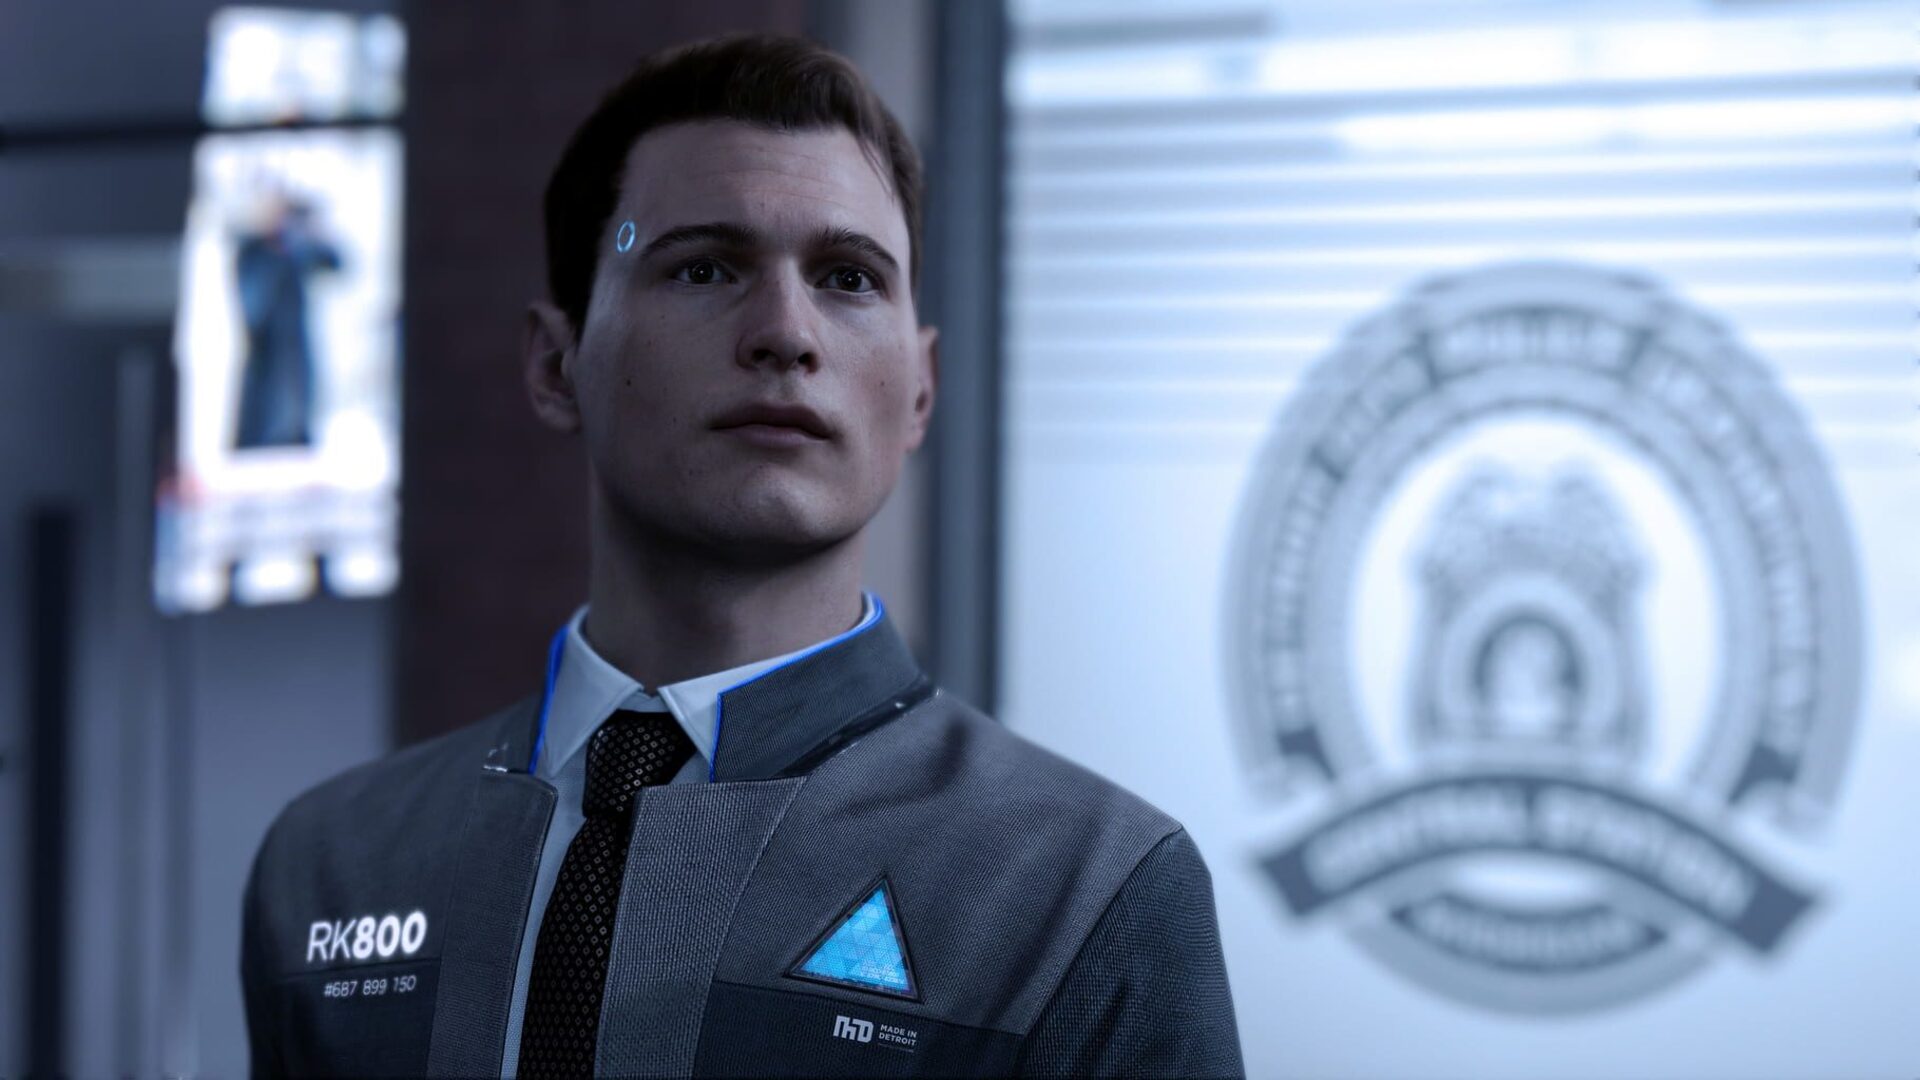 Detroit: Become Human - PC Steam